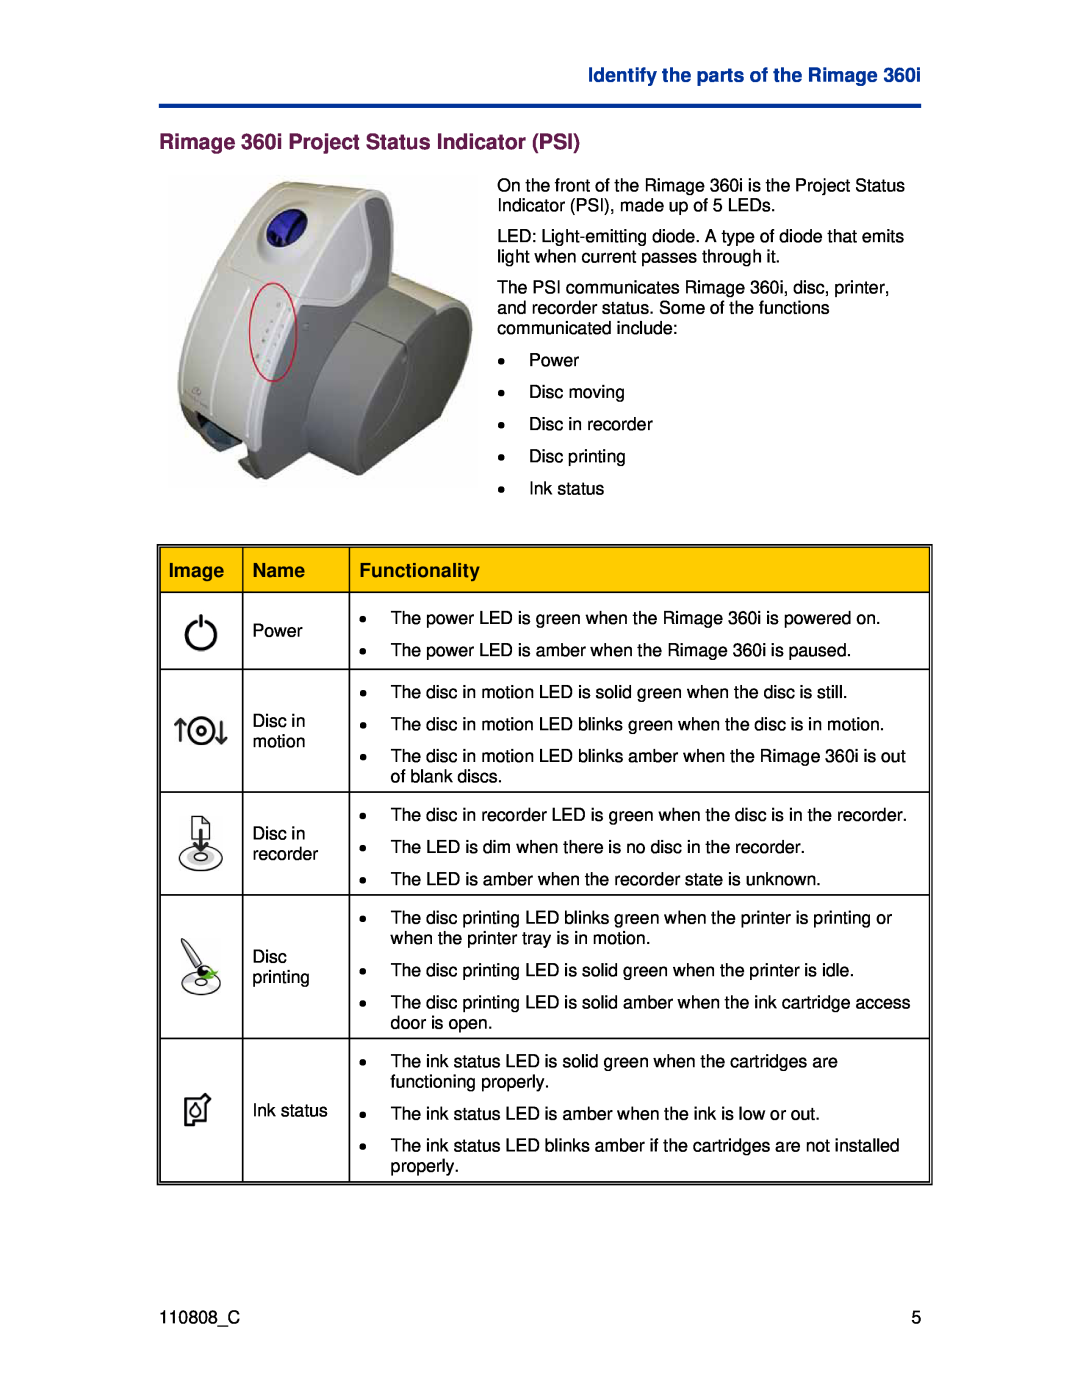 Rimage manual Rimage 360i Project Status Indicator PSI, Image, Name, Functionality, Identify the parts of the Rimage 